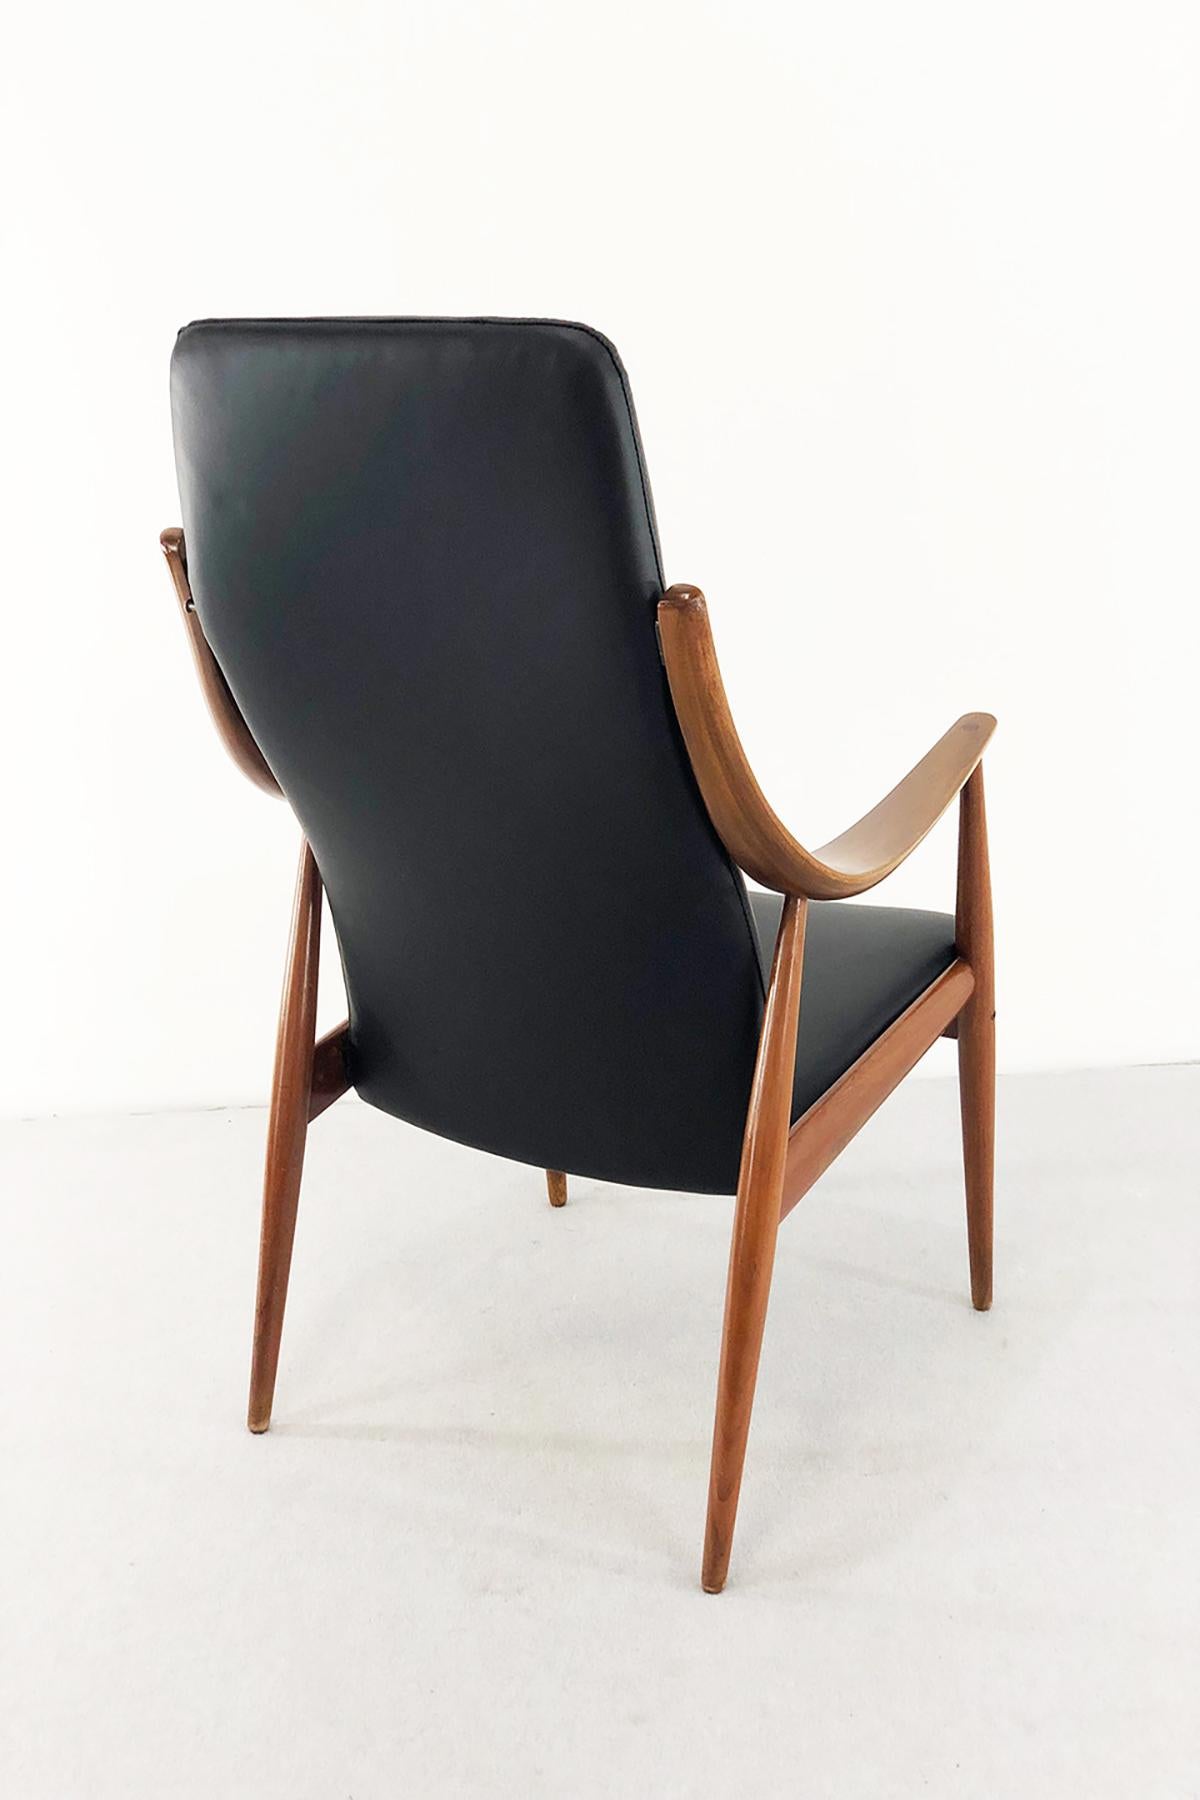 Mid-20th Century Ottoman and Lounge Chair by Peter Hvidt for France & Son